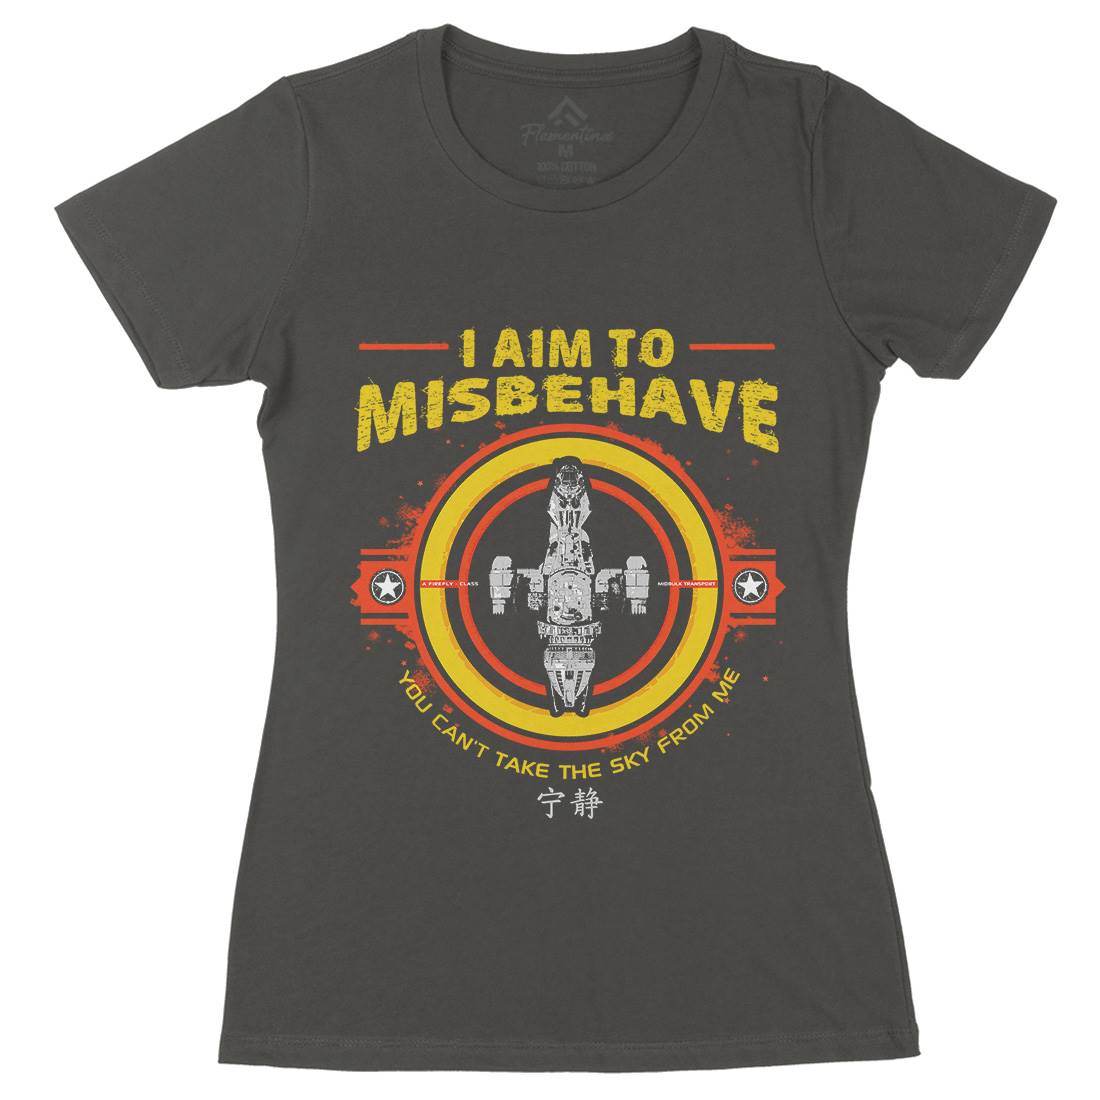 I Aim To Misbehave Womens Organic Crew Neck T-Shirt Space D352